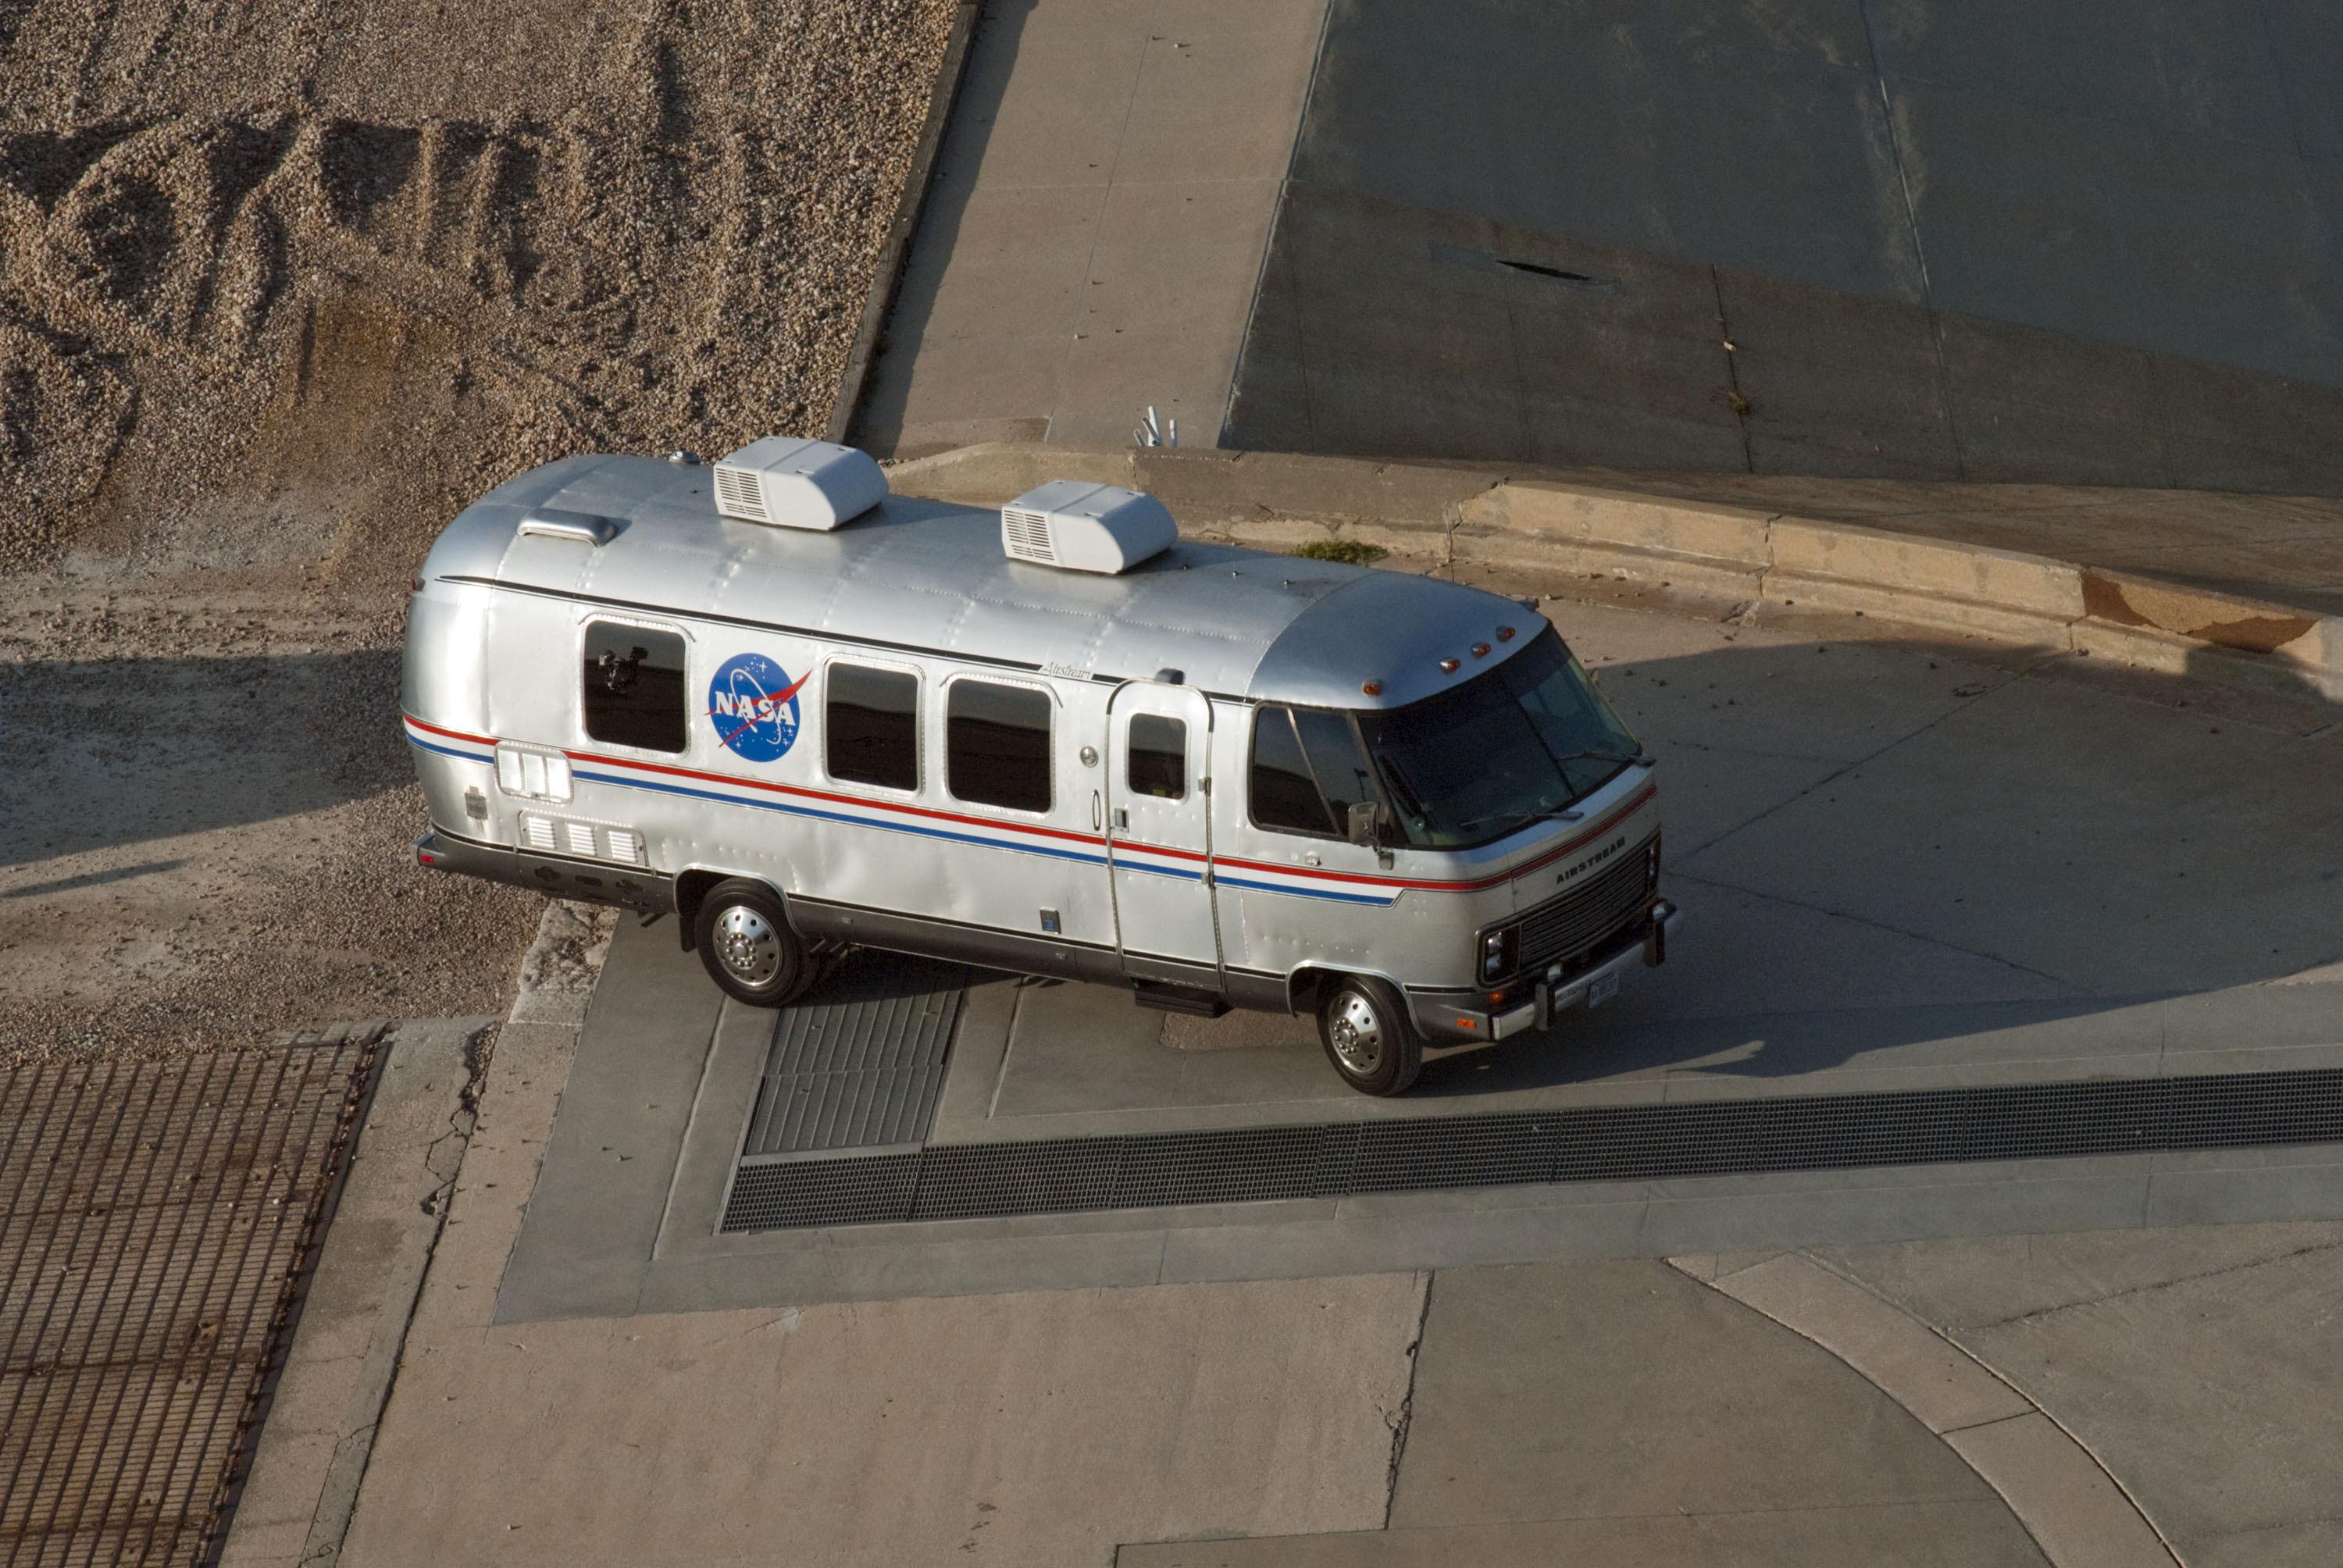 NASA is looking for a successor to the Astrovan thumbnail